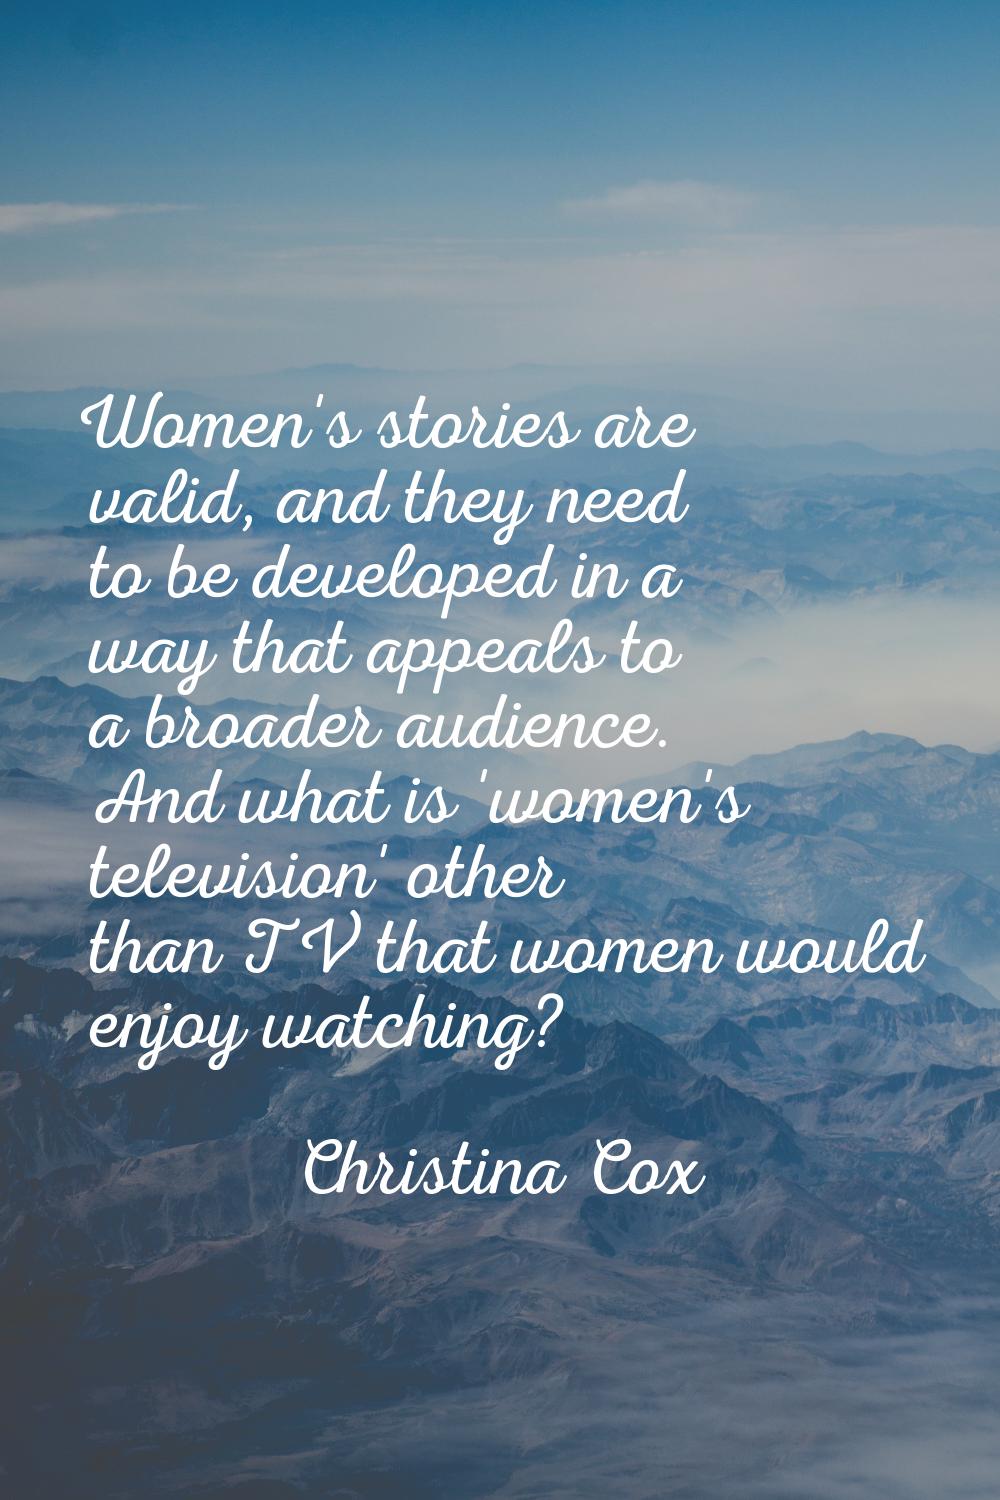 Women's stories are valid, and they need to be developed in a way that appeals to a broader audienc